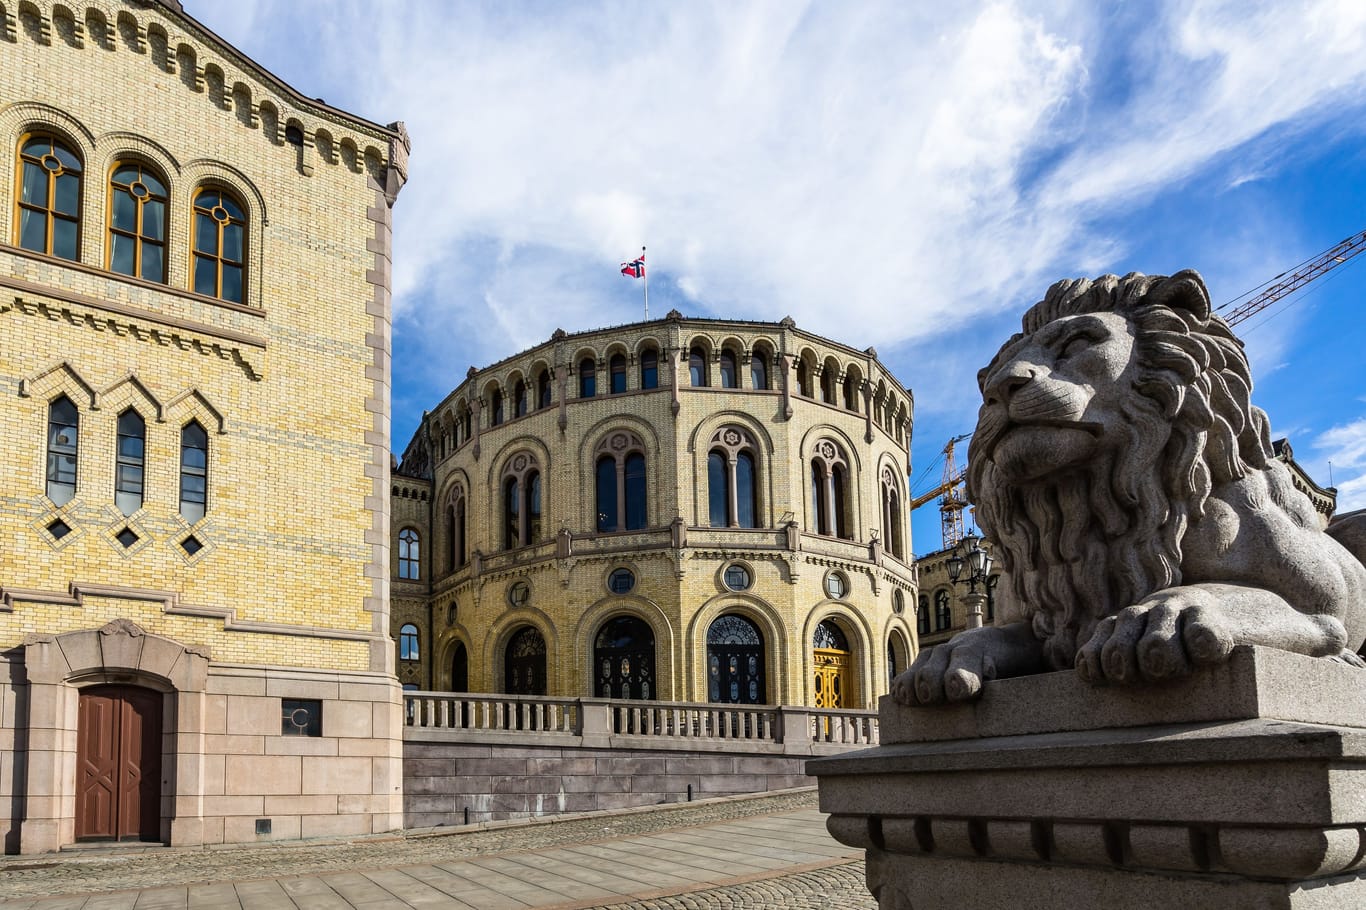 Lions statue outside the Norwegian Parliament building Oslo, Norway